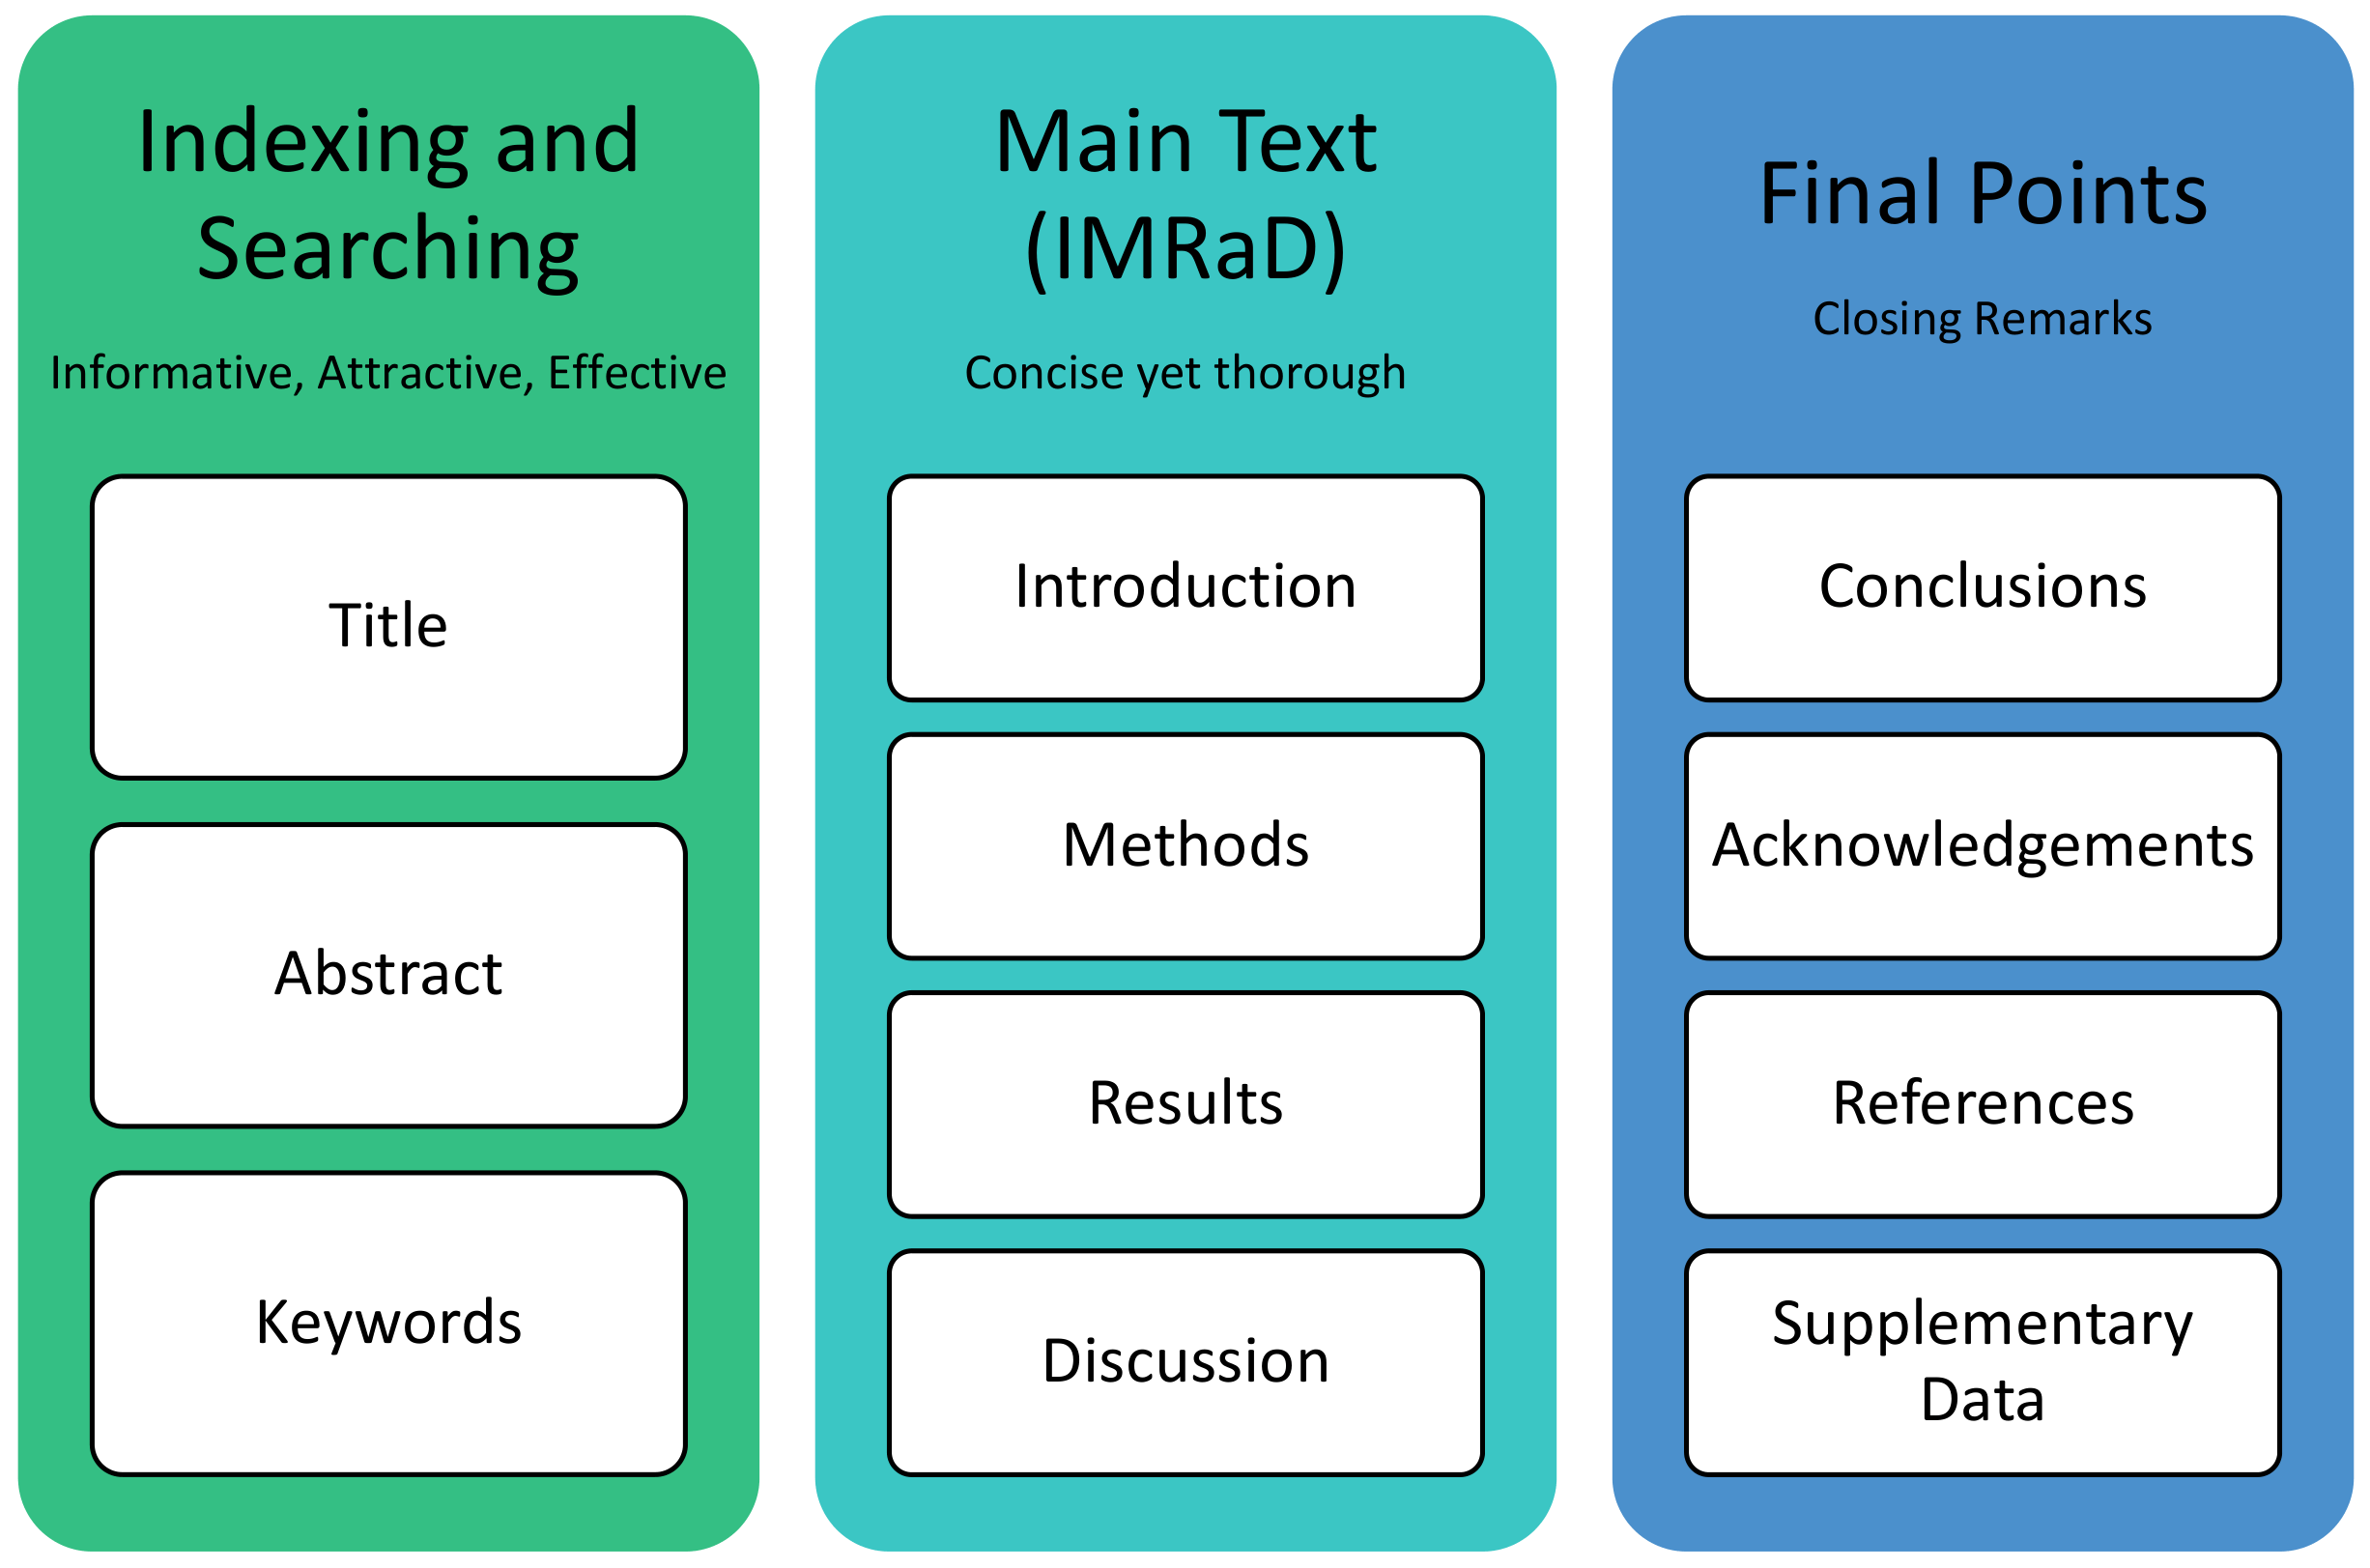 IMRaD: Structure of an Article